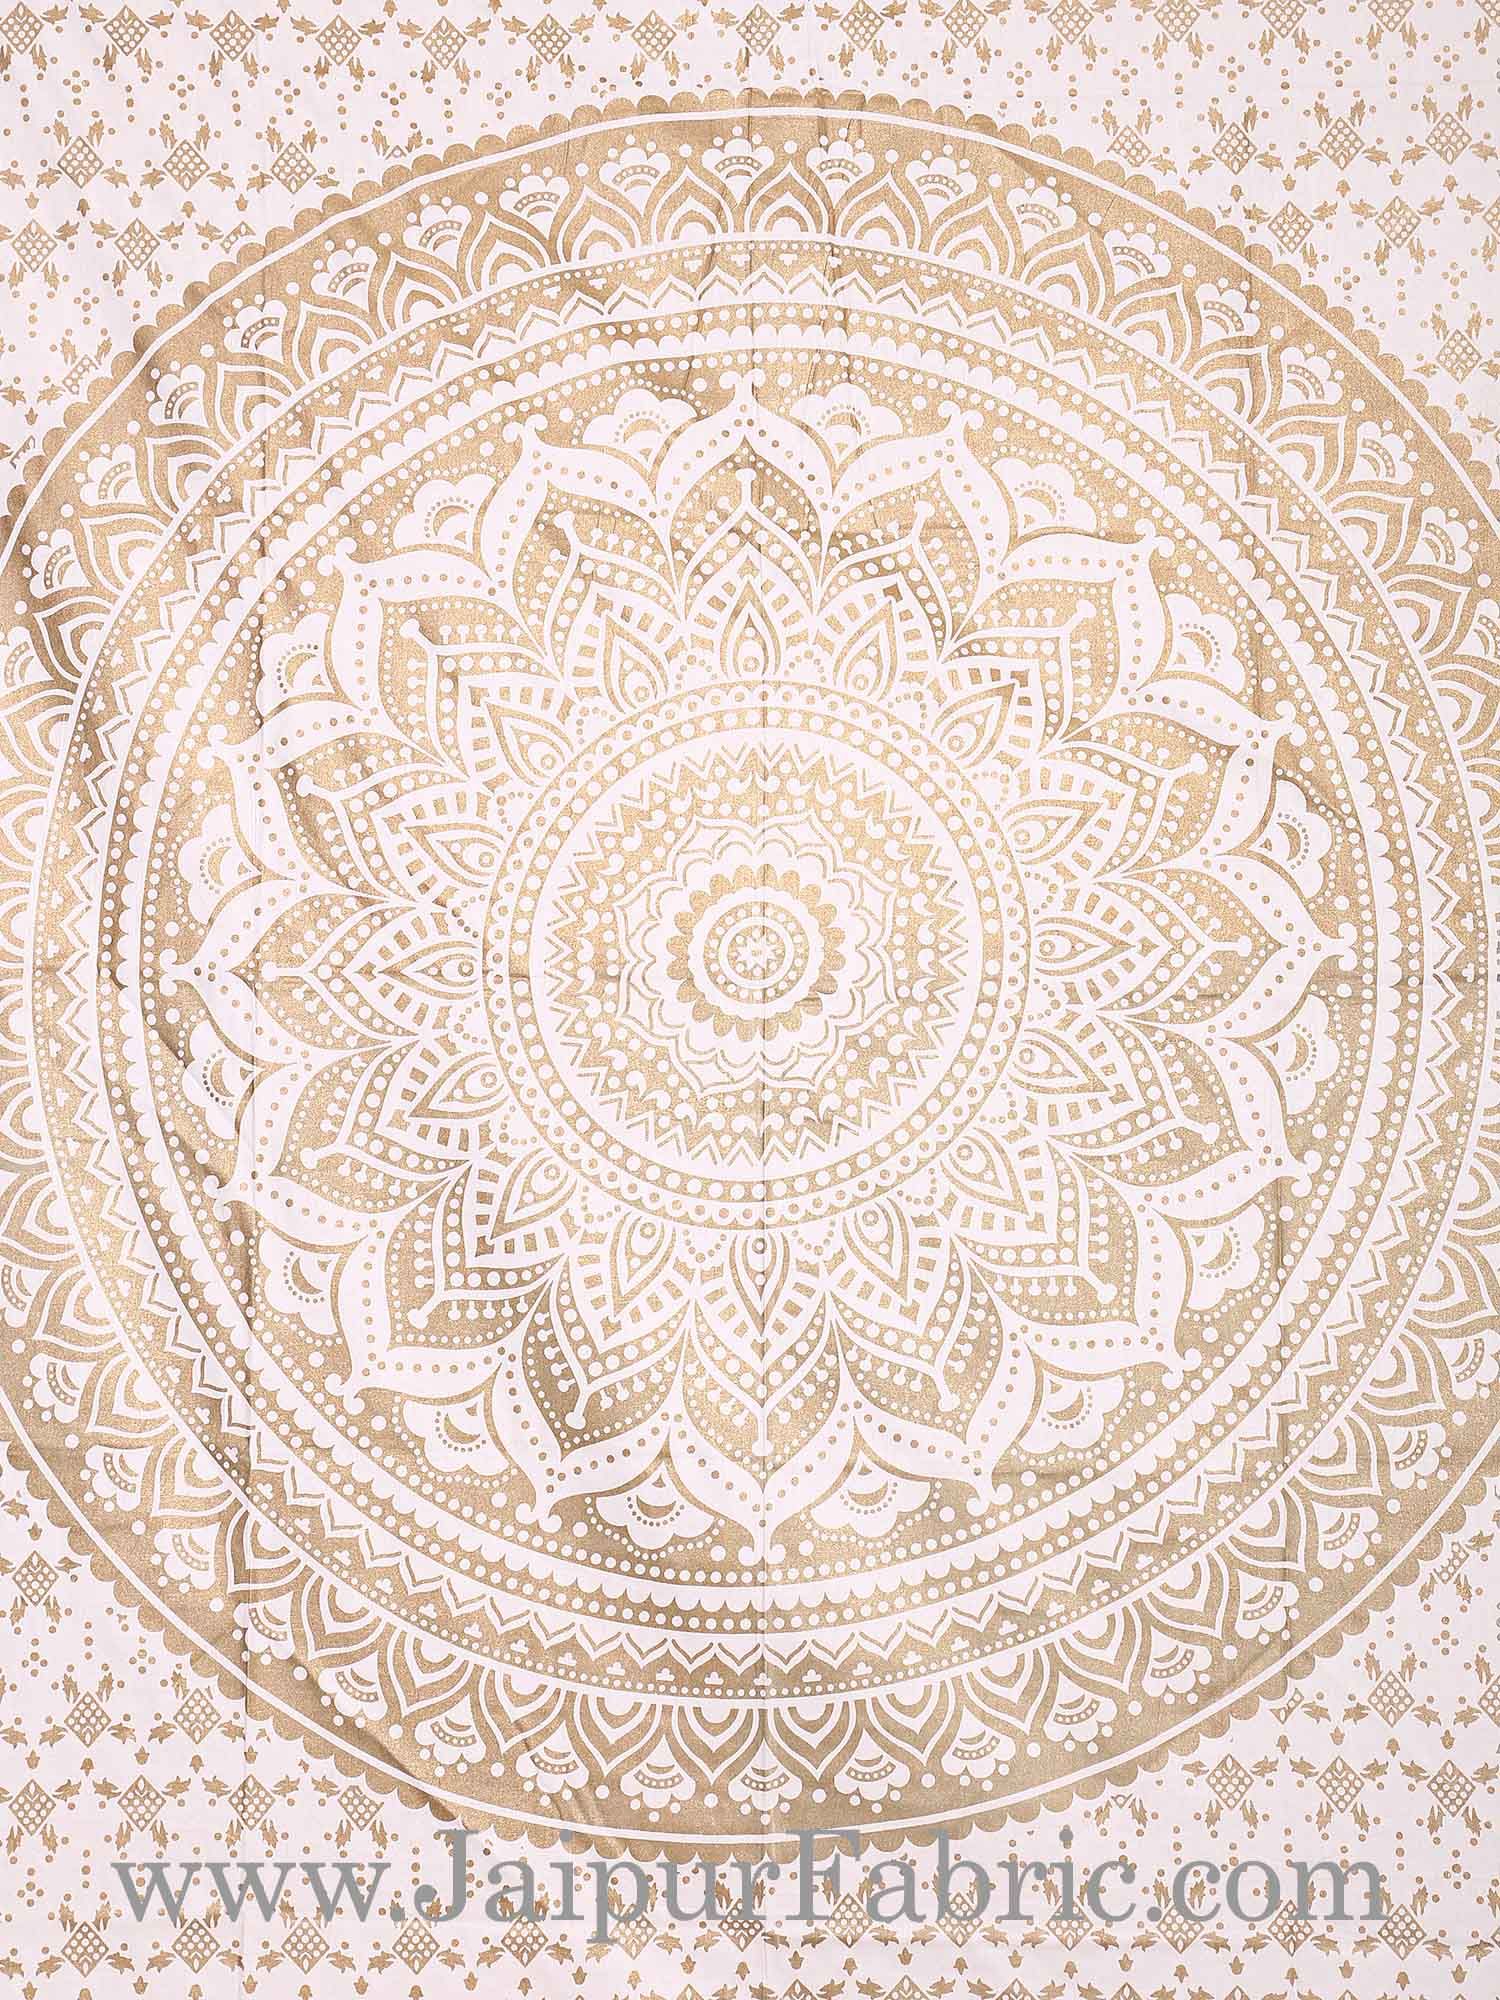 Gold Tapestry Ombre Mandala Wall Hanging Metallic Shine Bohemian Bedspread and beach throw 90x60